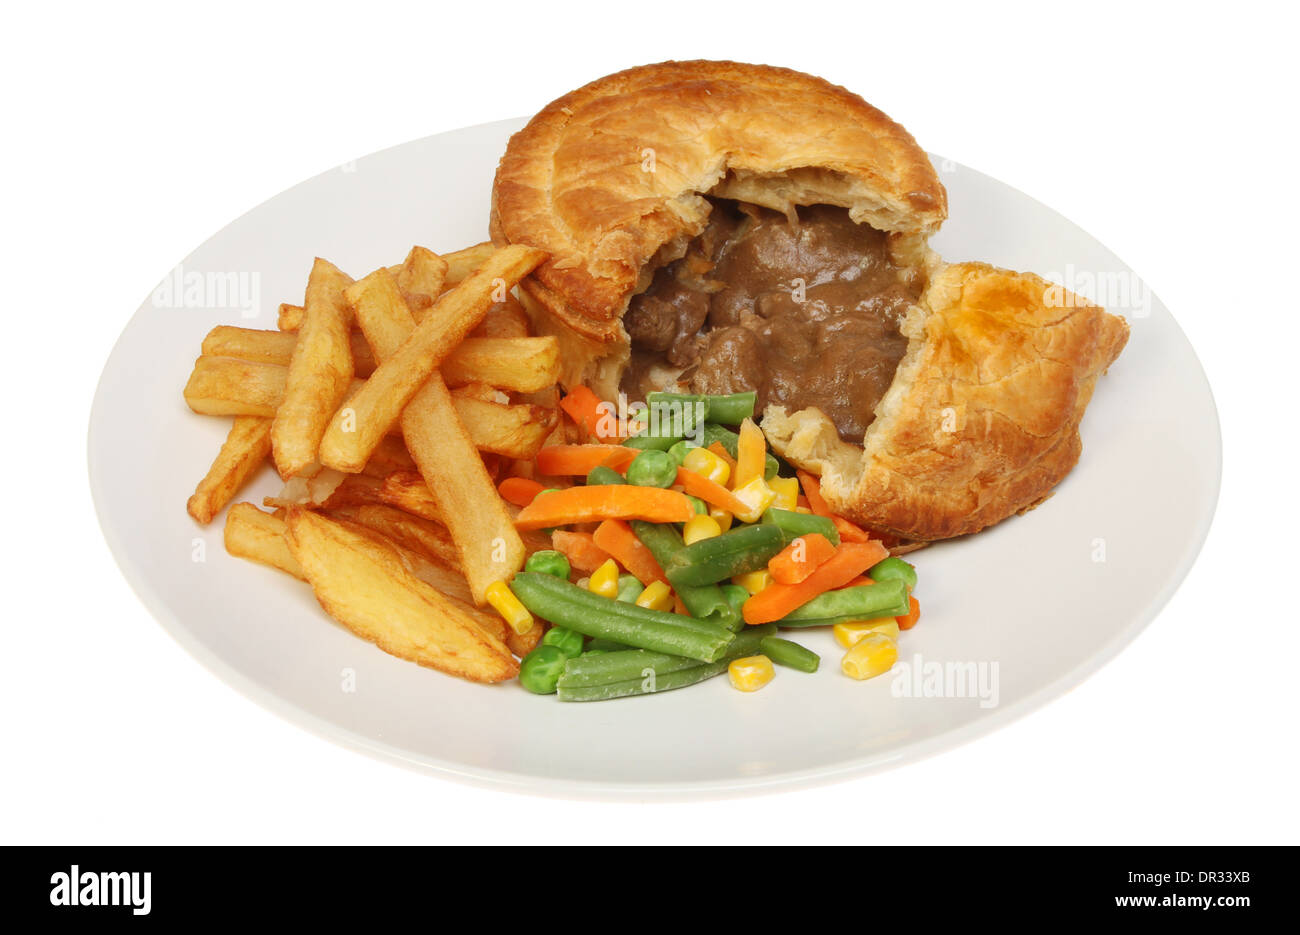 Steak pie chips and mixed vegetables on a plate isolated against white Stock Photo